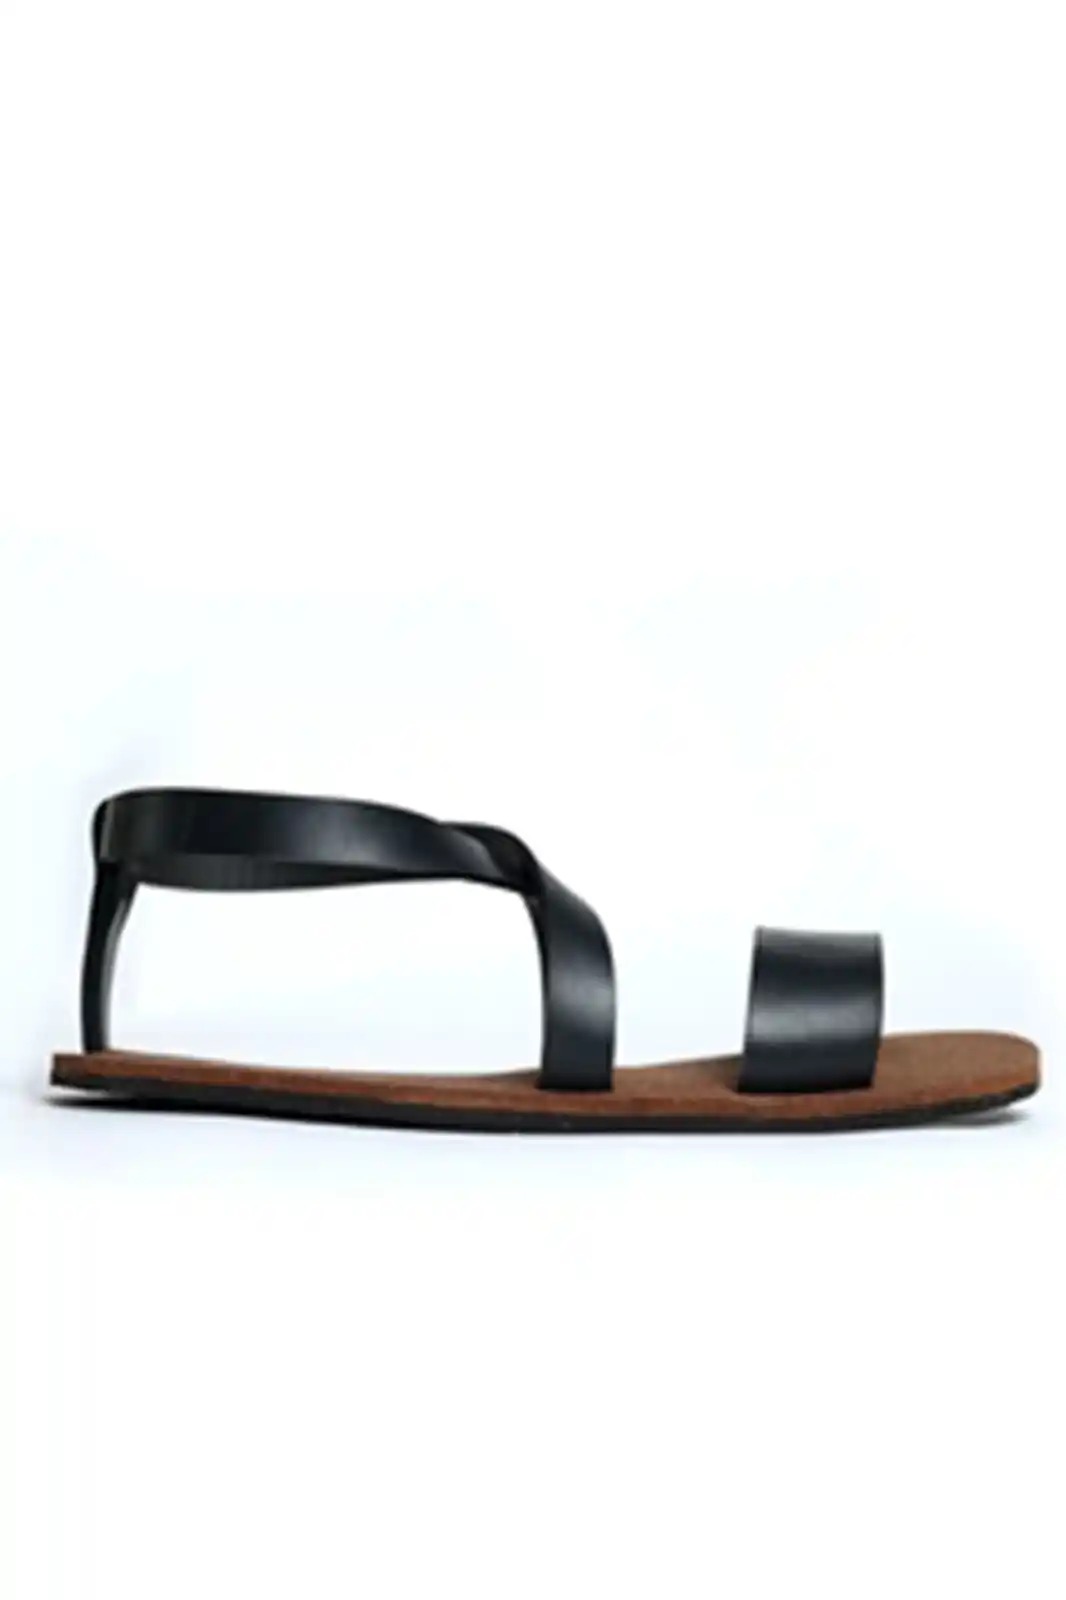 Paaduks Solid Black Sulu Sandals For Women, womens flats, women's flats, womens flats sandals, women flats shoes, womens flats comfortable, organic footwear, vegan footwear india, without heel sandals, vegan shoes in india, vegan shoes india, best brand for women's sandals in india, ladies sandals without heel, womens sandals and flip flops, women sandals leather, ladies sandals leather, two strap sandals, flip flops and slippers, women's sandals with soft soles, womens paaduks, womens footwear, womens sandals, women's shoes, women's sandals, women's formal shoes, womens sandals heels, women's heel sandals, women's shoe brands, womens sandals crocs, women's shoes online, women's footwear flats, womens footwear online, women's footwear brands, womens sandals online, sandals women's shoes, gold women's shoes, best women's footwear, women's sandals for wedding, women's footwear amazon